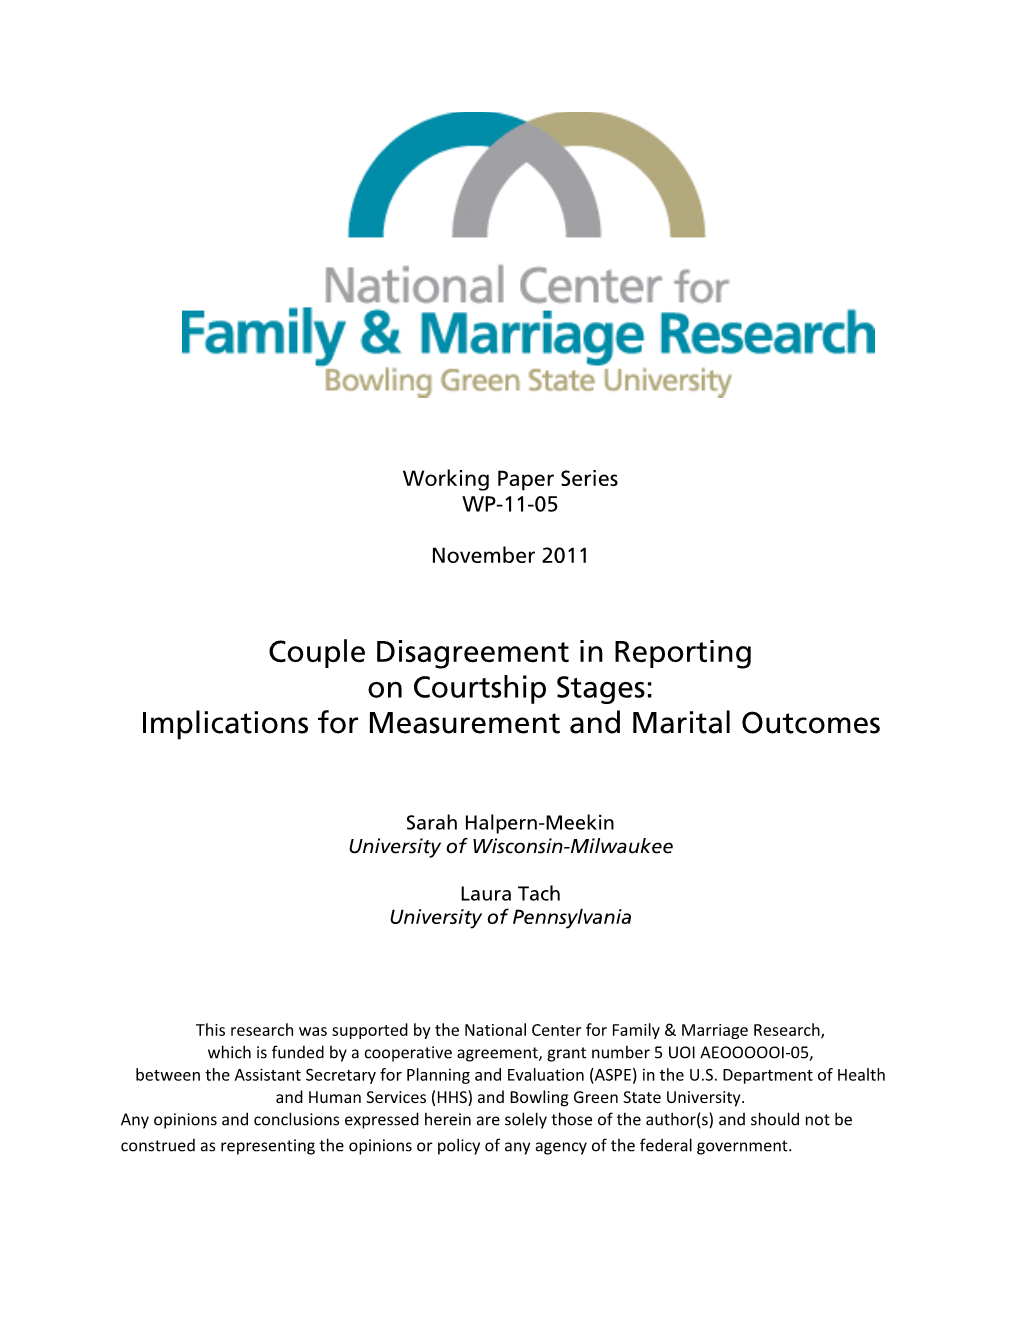 Couple Disagreement in Reporting on Courtship Stages: Implications for Measurement and Marital Outcomes